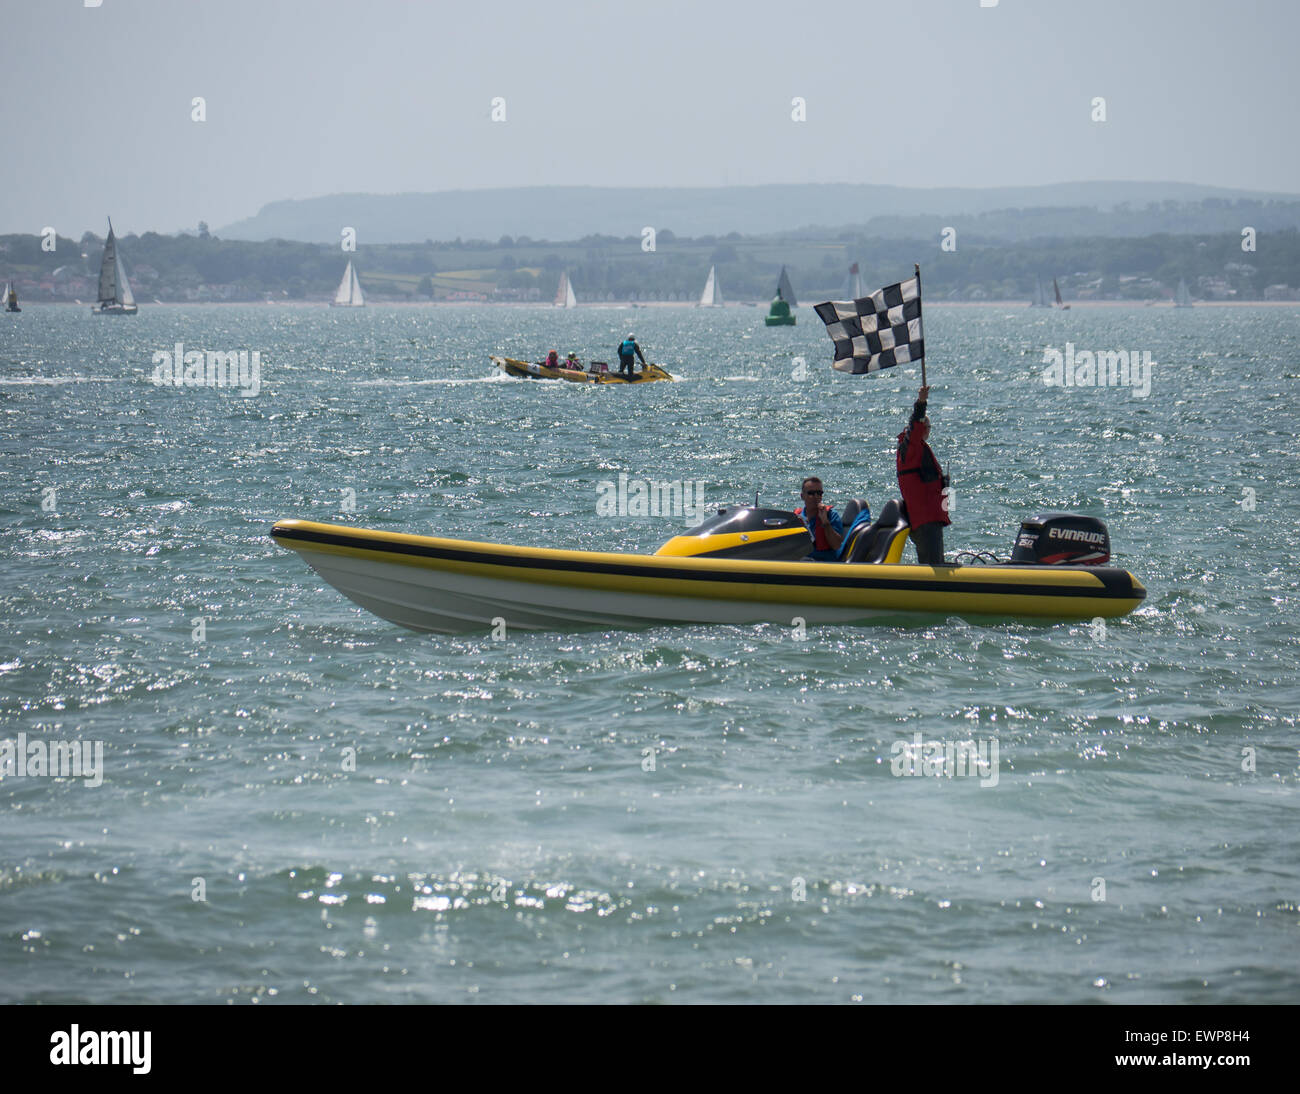 A yellow marshals boat at the finish line of power boat race with a marshal waving a checkered flag. Stock Photo